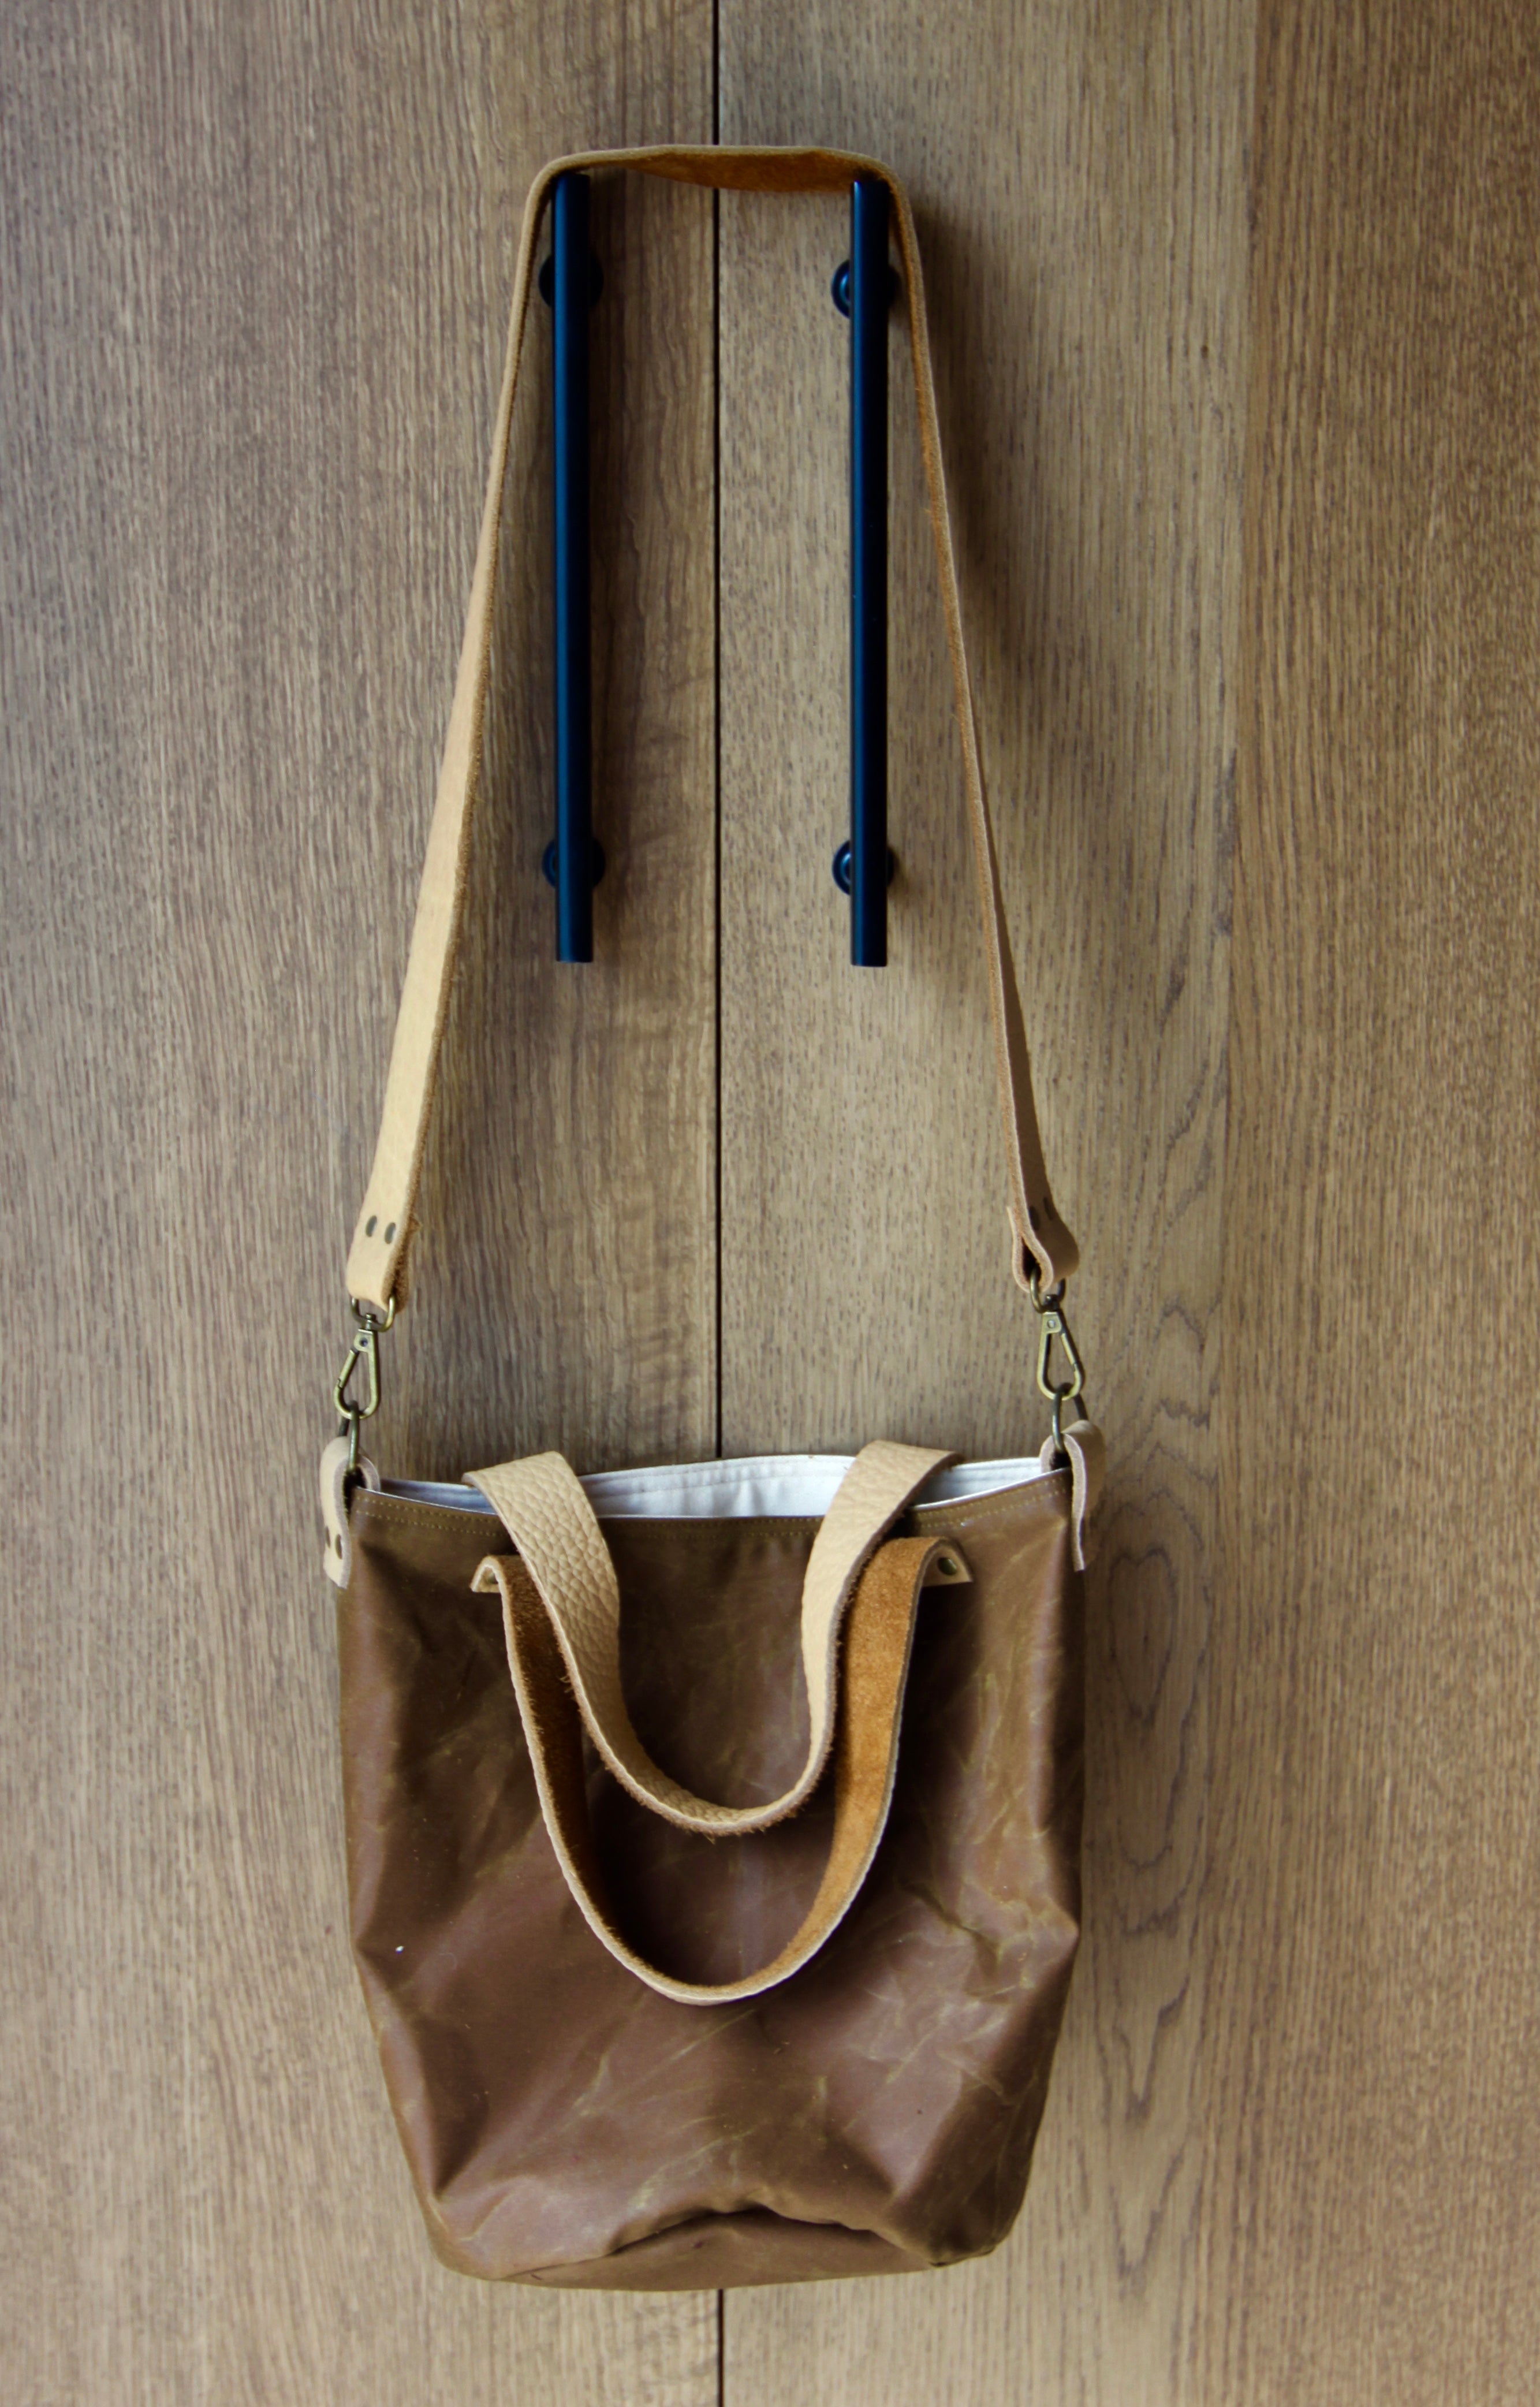 A brown bag with 3 handles